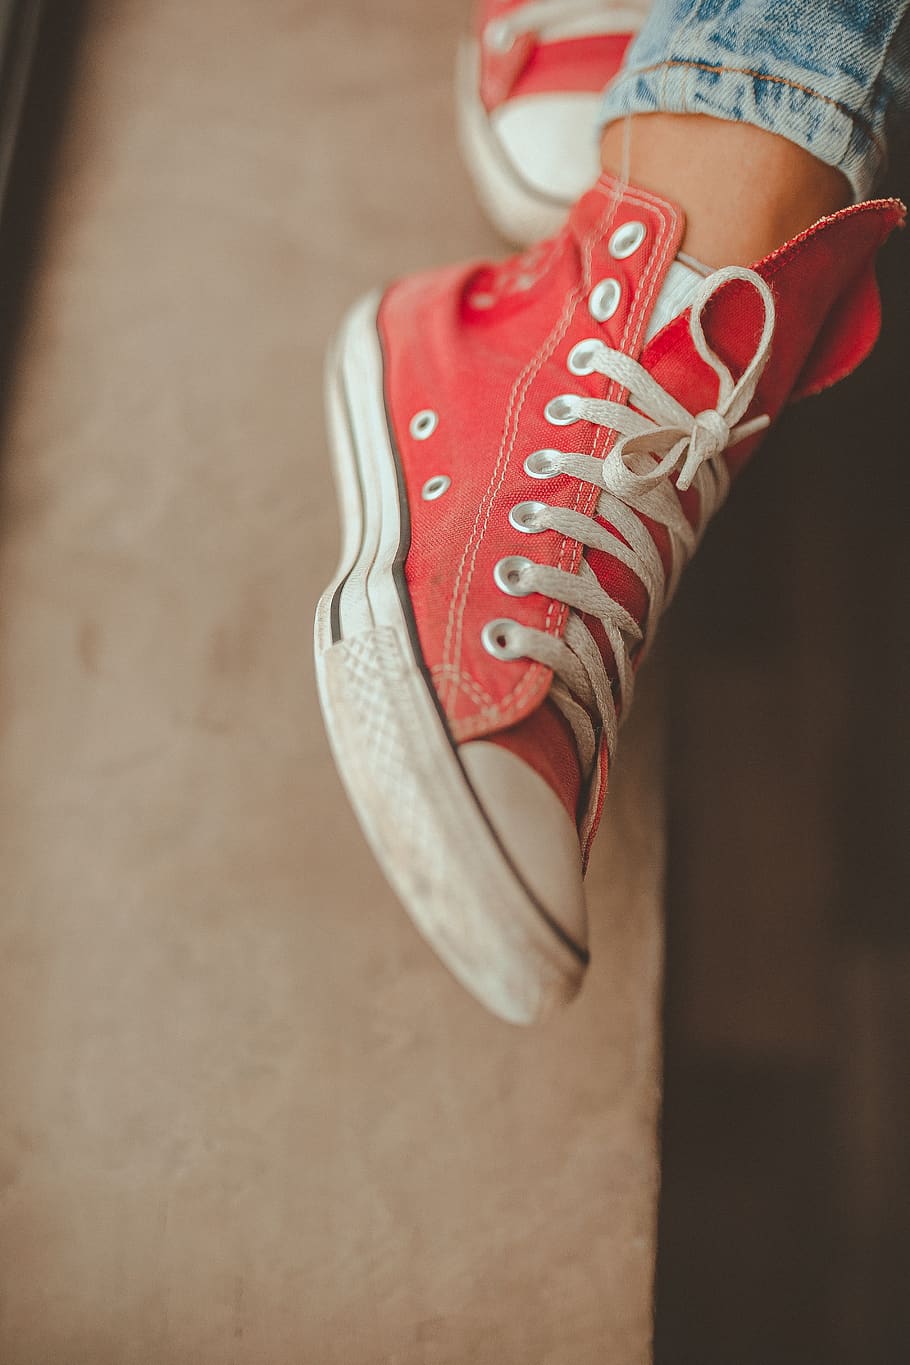 Person Wearing White-and-red High-top Sneaker, close-up, colors